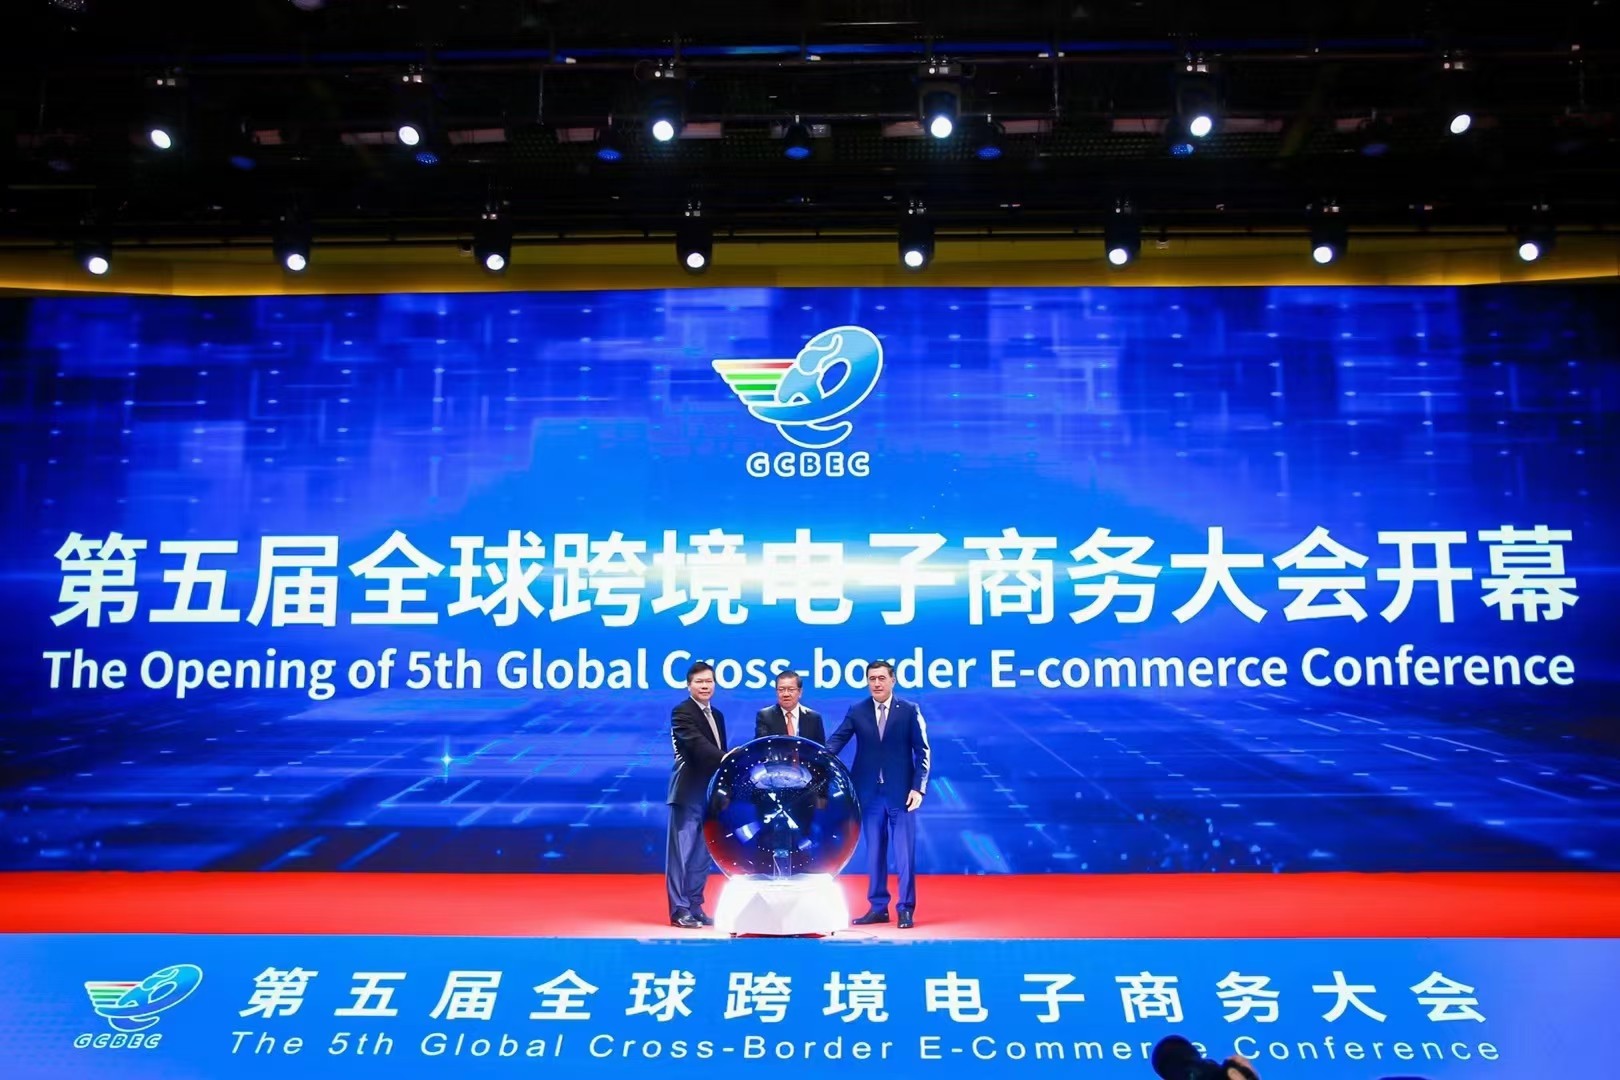 The Opening of 5th Global Cross-border E-commerce Conference